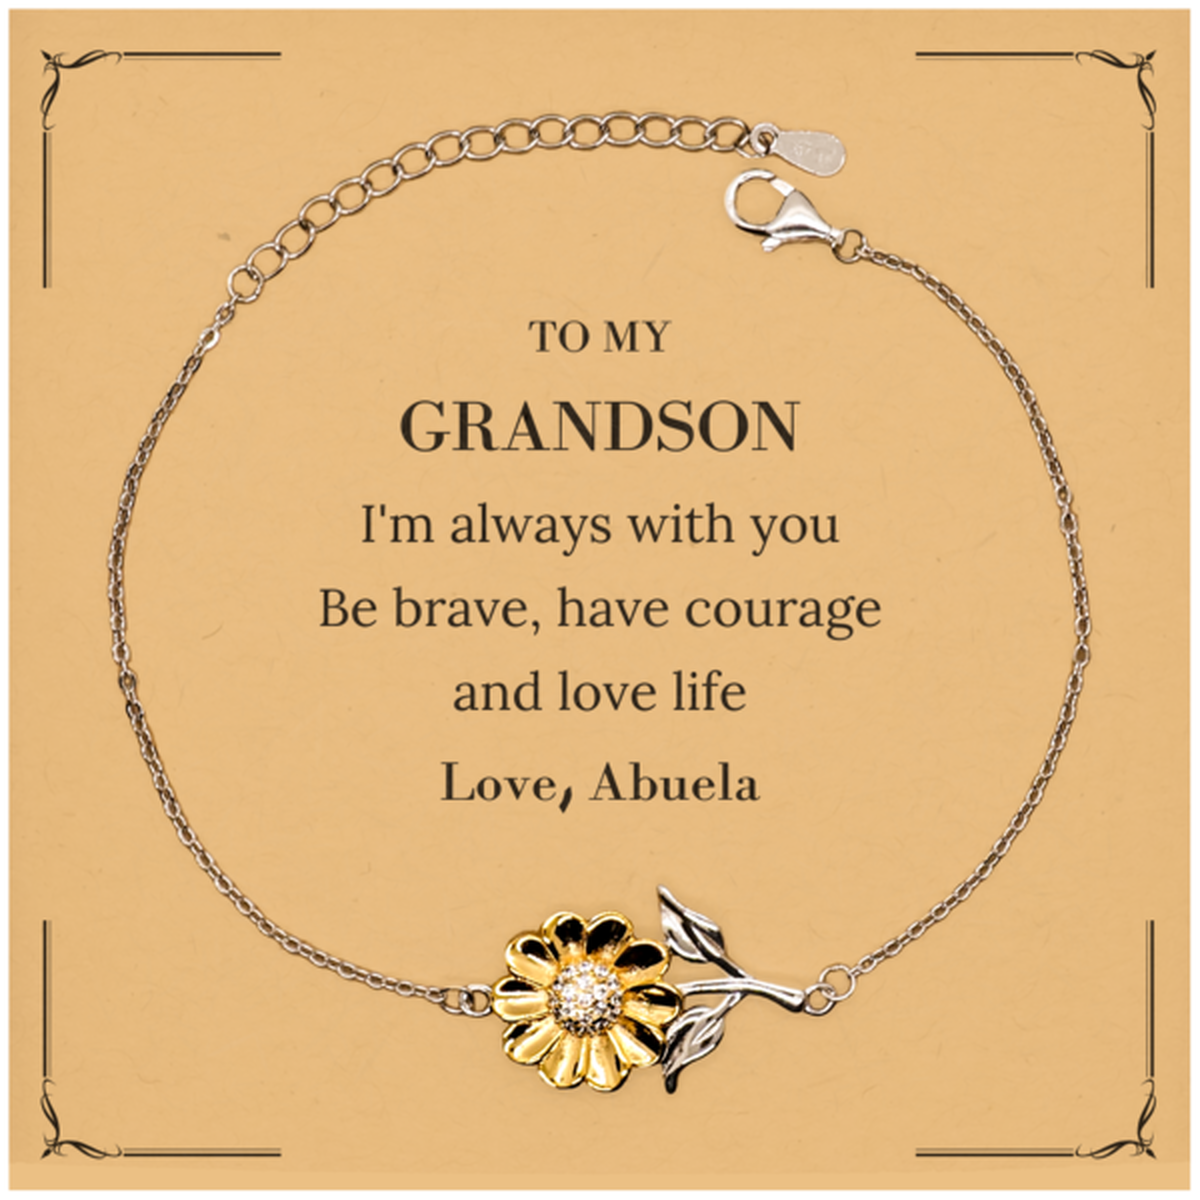 To My Grandson Gifts from Abuela, Unique Sunflower Bracelet Inspirational Christmas Birthday Graduation Gifts for Grandson I'm always with you. Be brave, have courage and love life. Love, Abuela